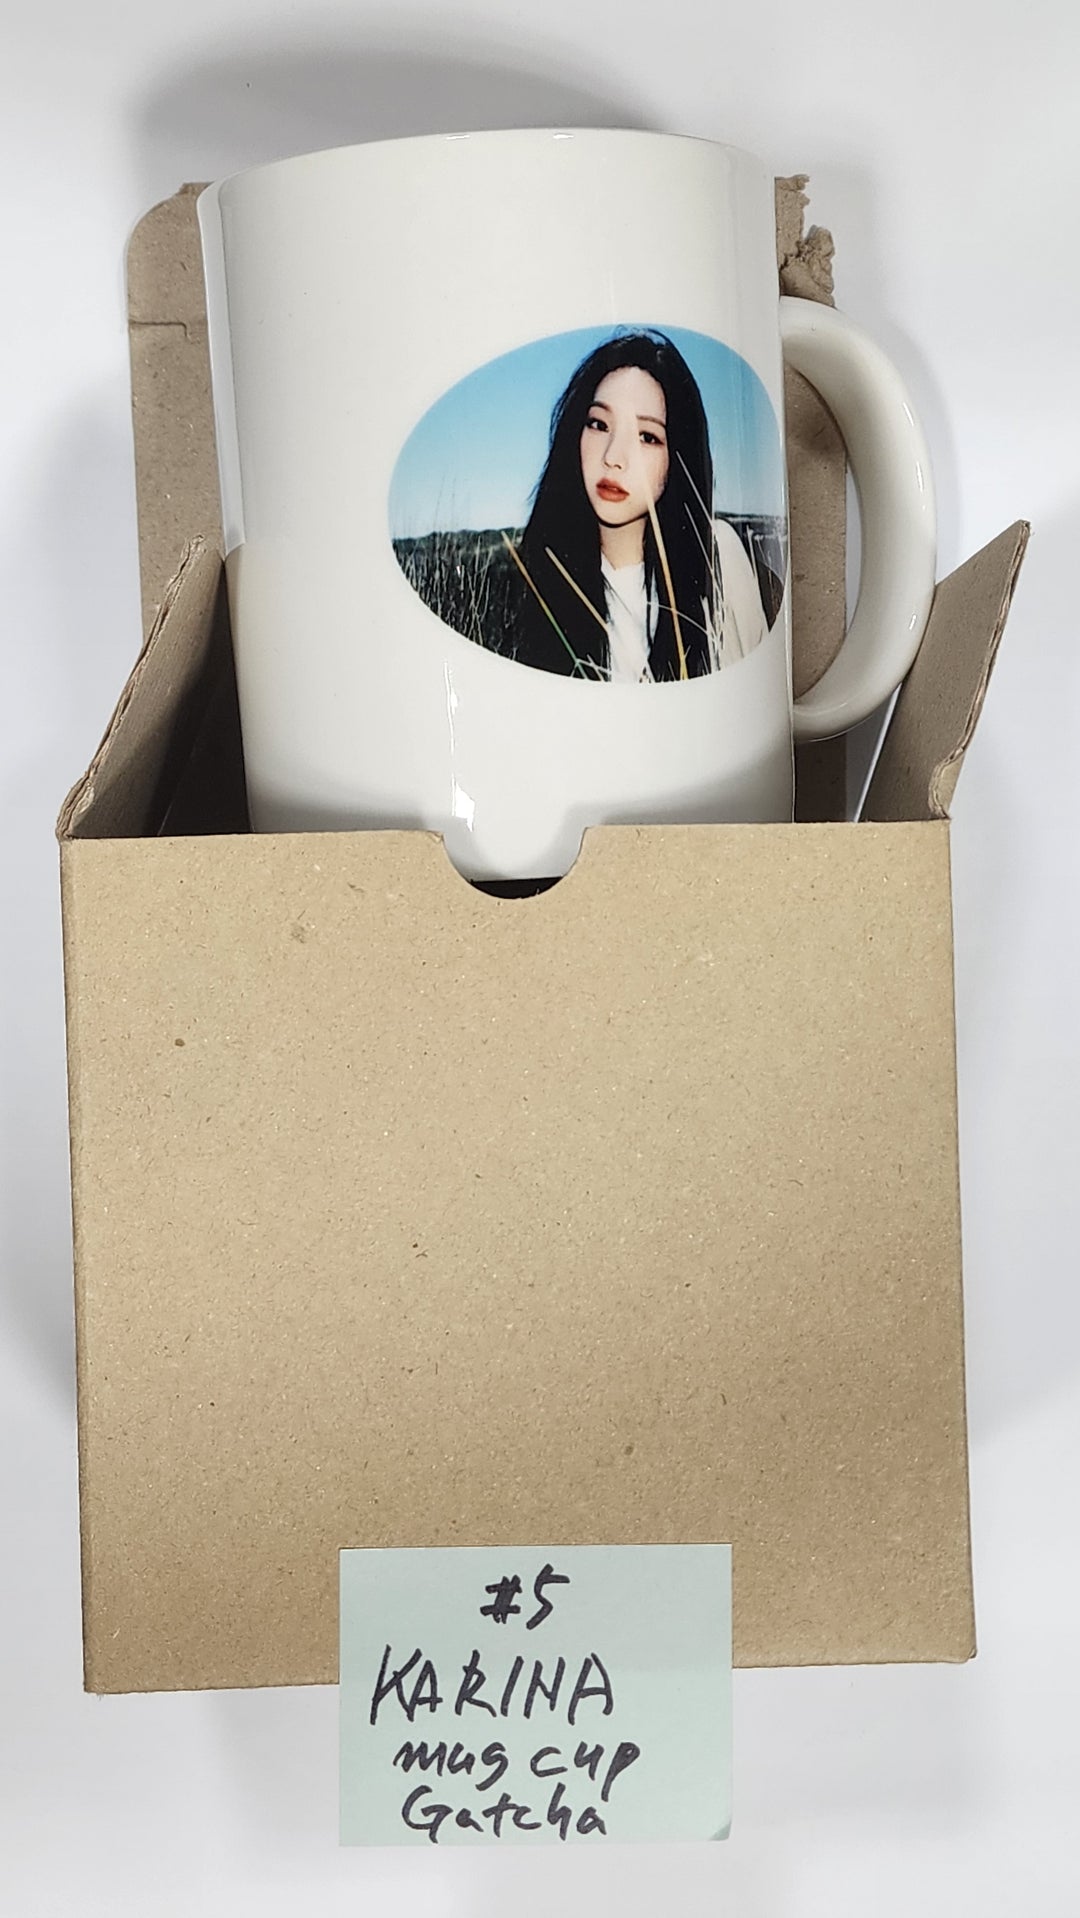 Aespa "MY WORLD" - Everline Lucky Draw Event Photocard, MD [Mug Cup, Hand Mirror, Pin Button]